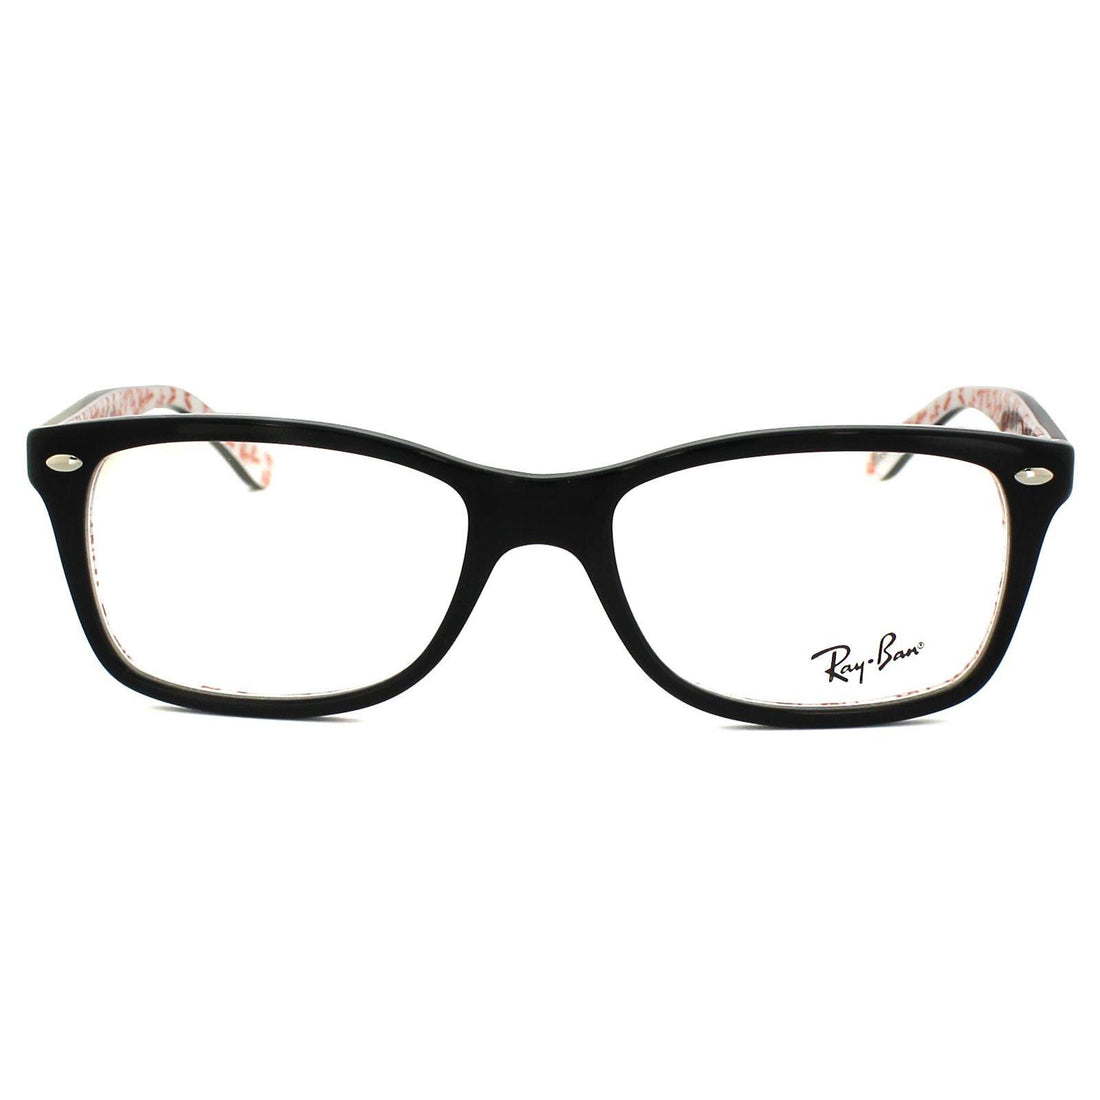 Ray-Ban 5228 Glasses Top Black On Texture White 50